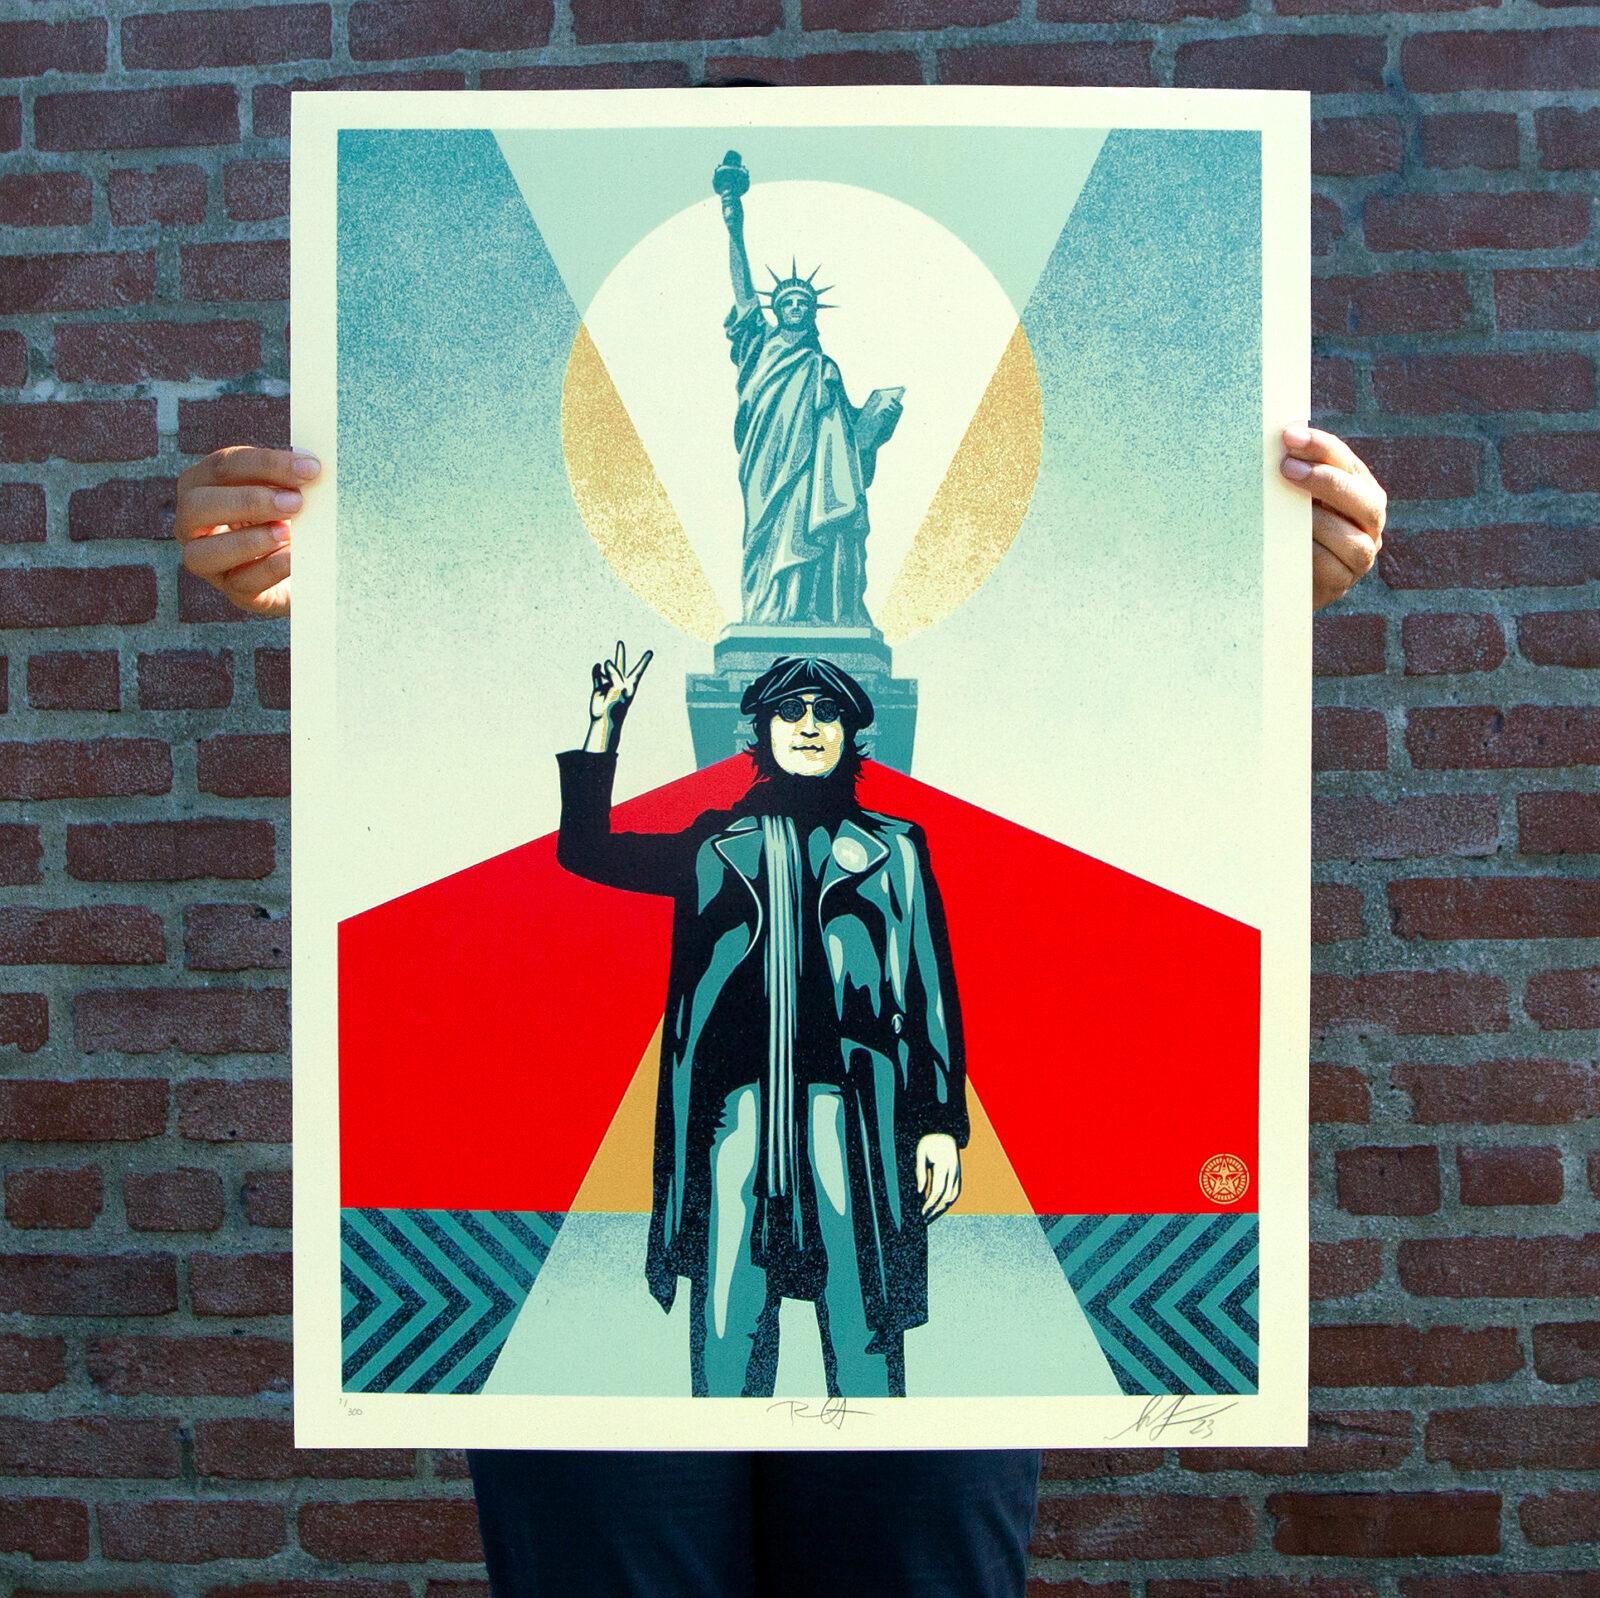 24" x 18" Unframed
Limited Edition Screen Print on Thick Cream Speckletone Paper of 300
Hand Signed by Shepard Fairey and Bob Gruen

